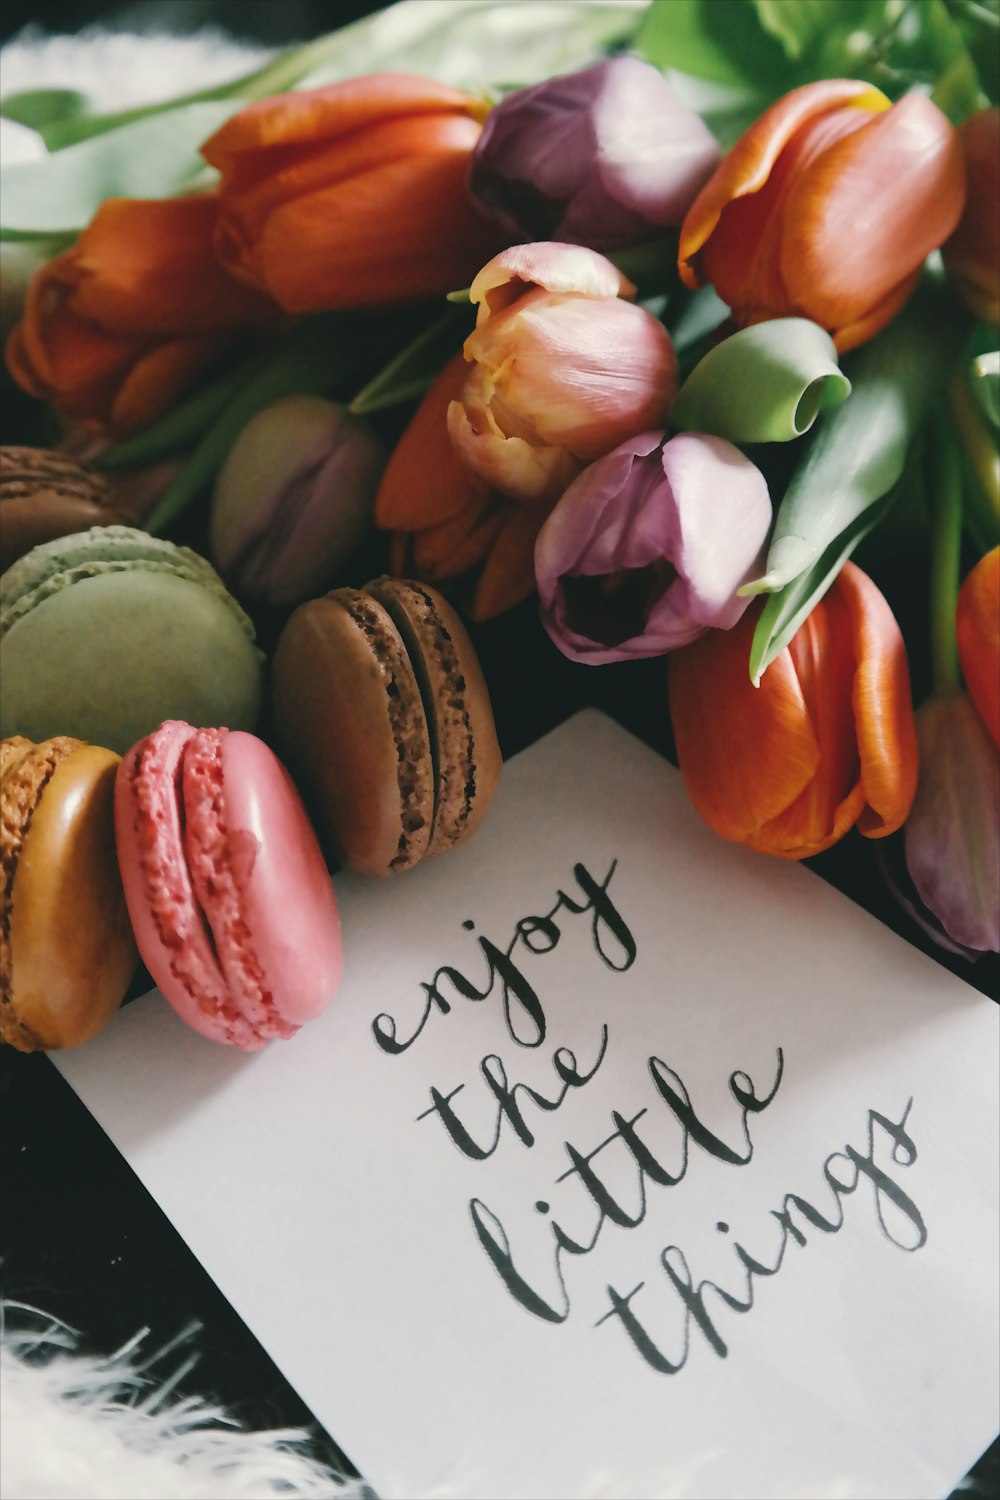 A piece of paper next to colorful snacks that reads "Enjoy the little things."